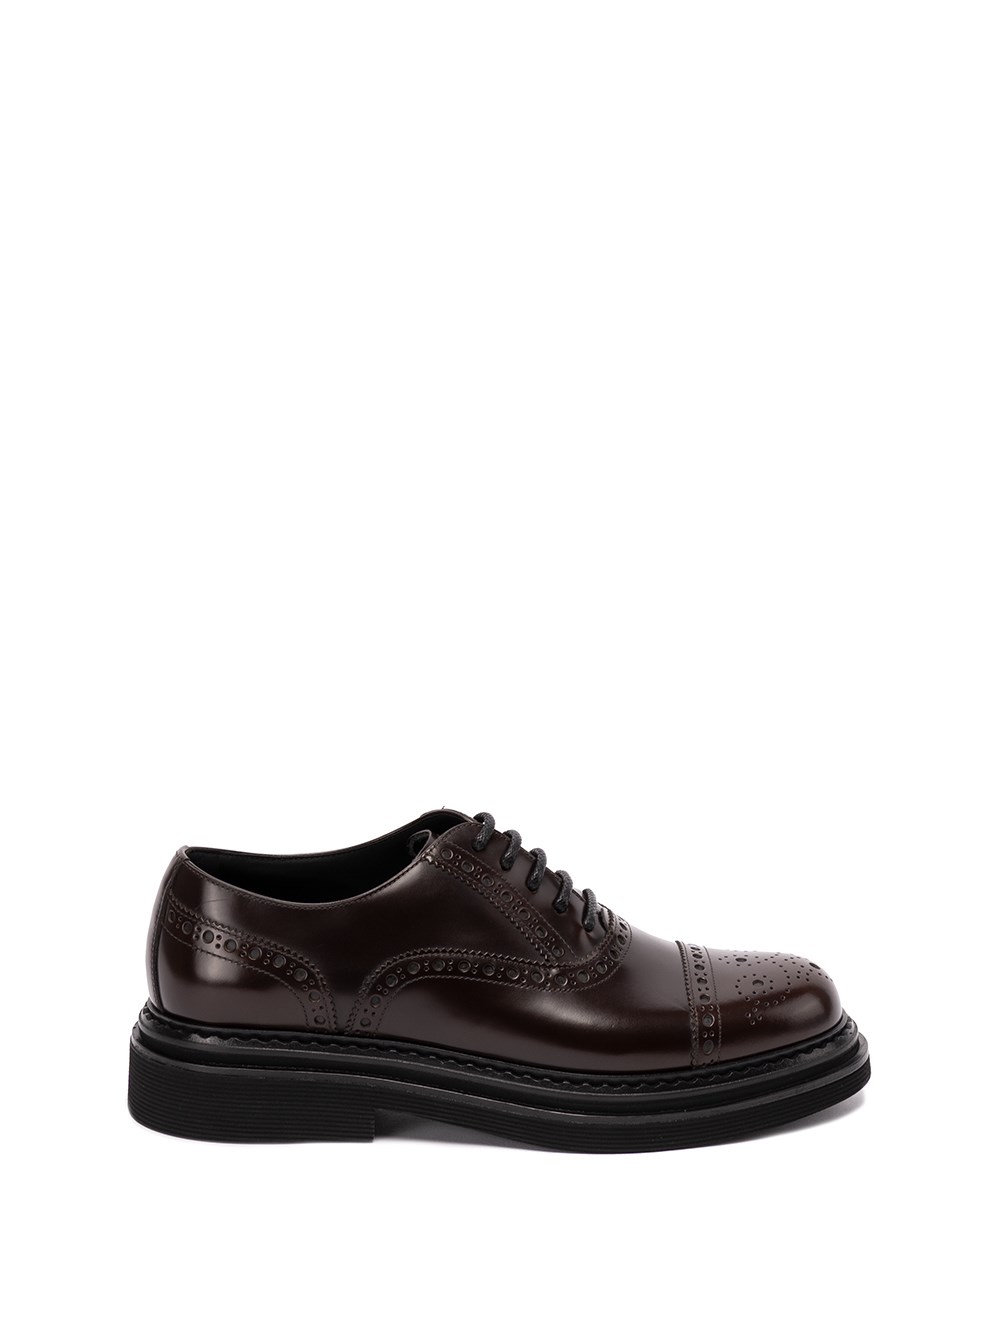 Dolce & Gabbana Brushed Leather Oxford Shoes In Brown